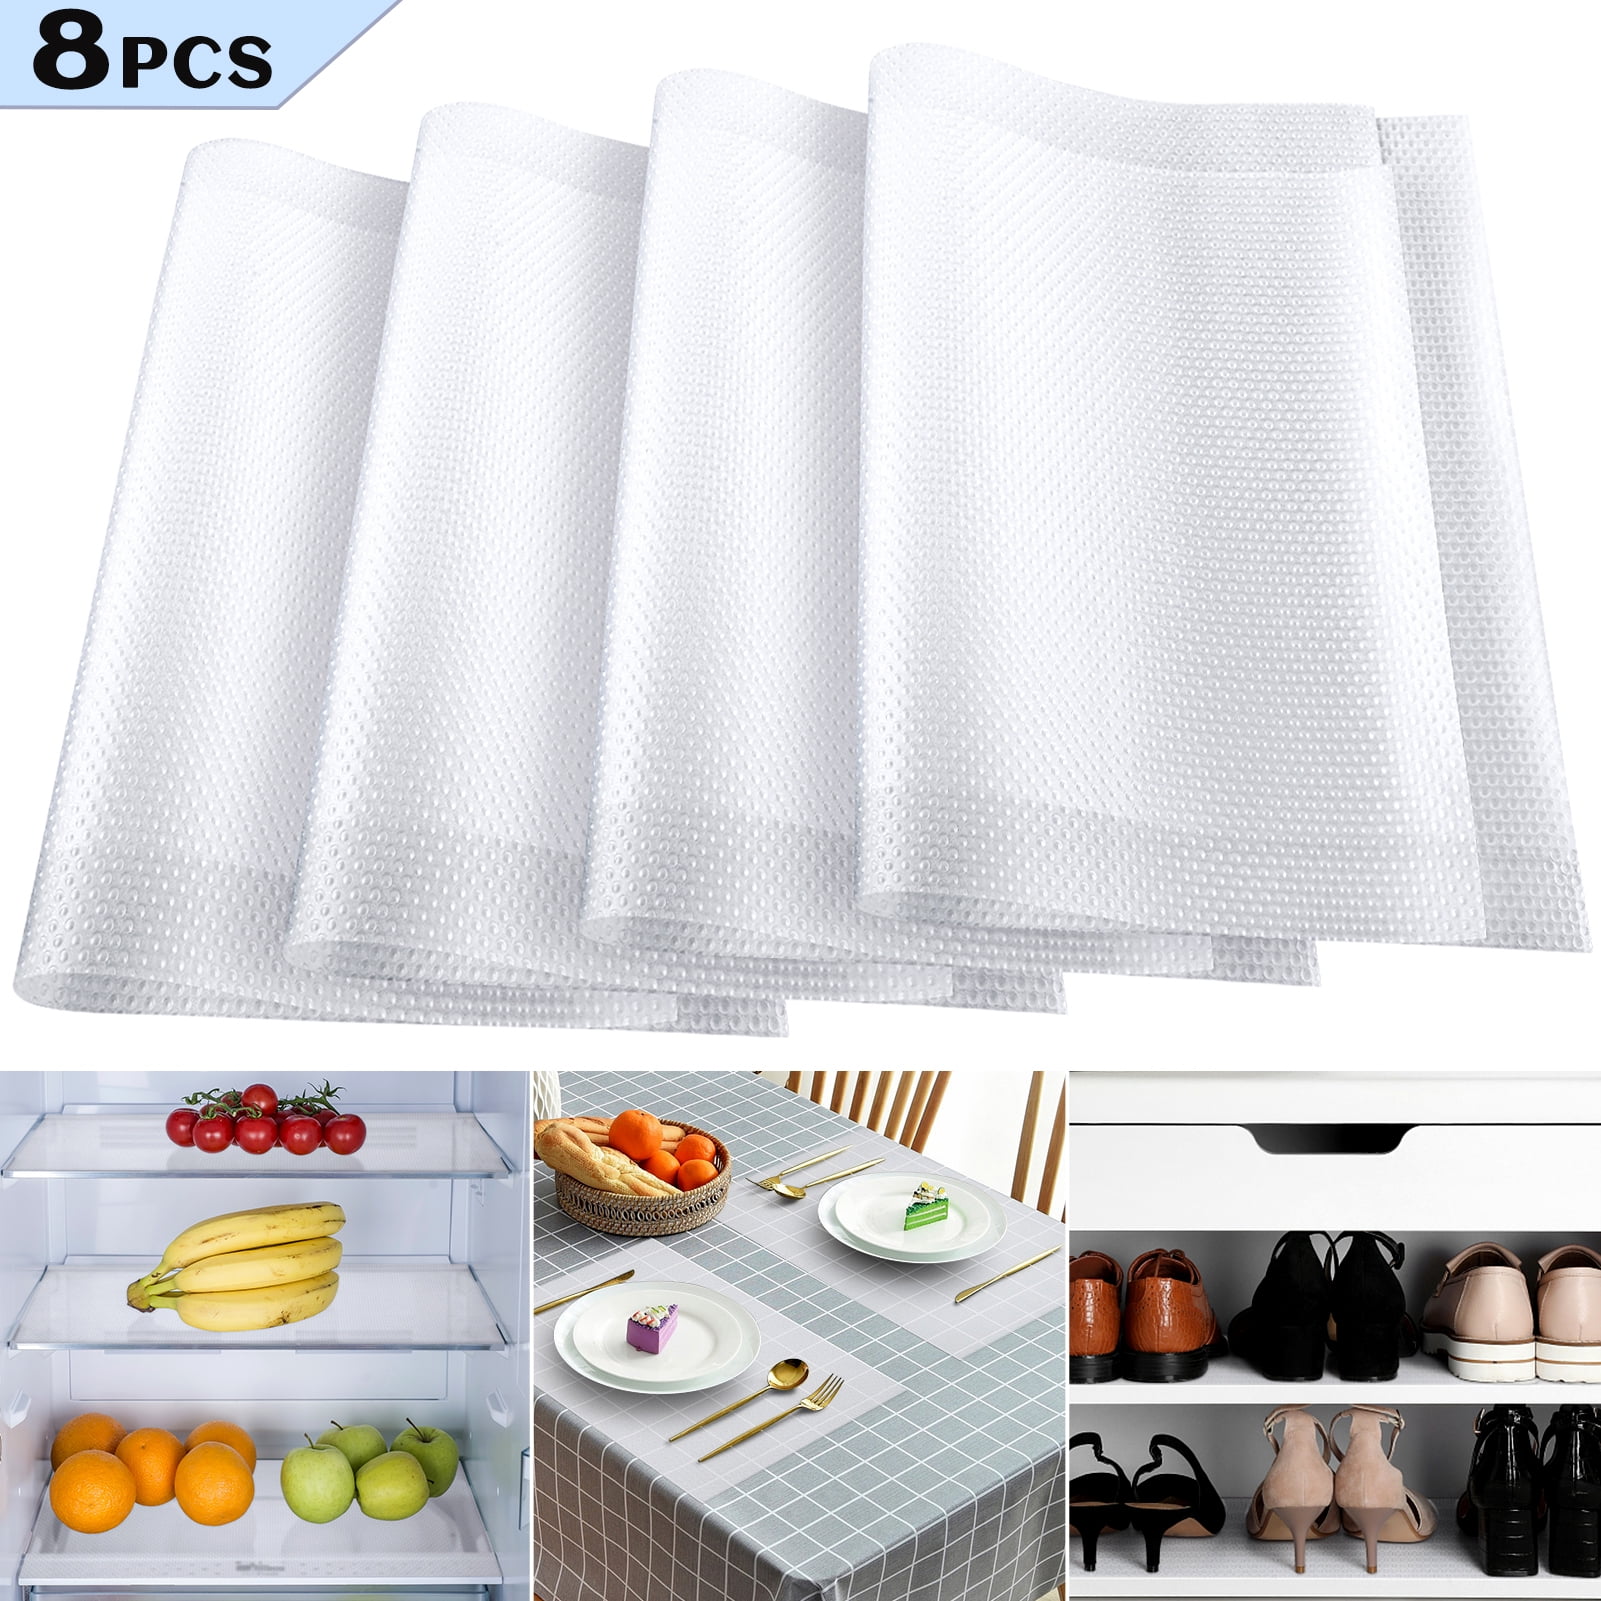 12x 60 Extra Thick Shelf Grip Liner Non Slip for Kitchen